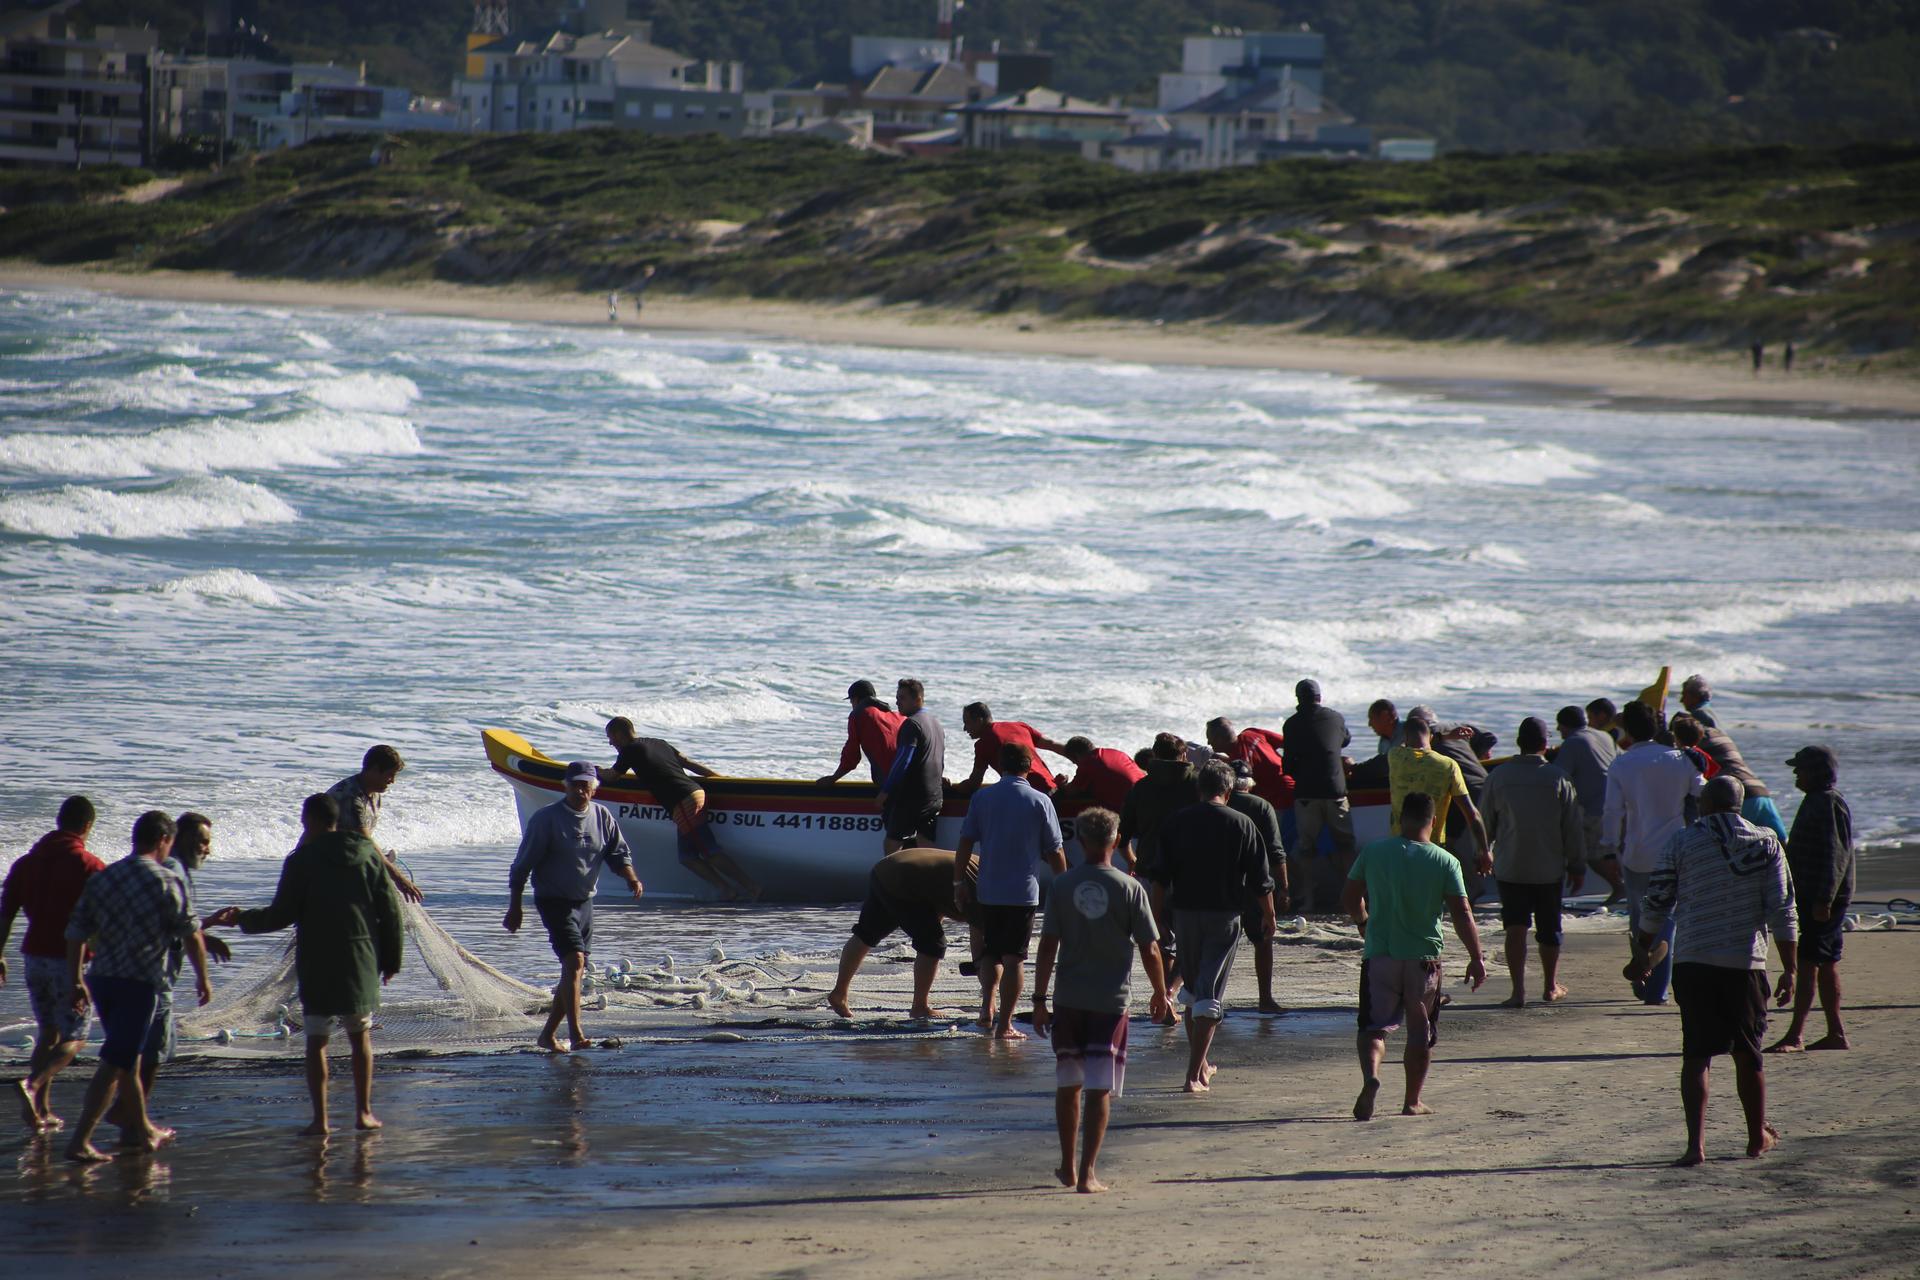 Fisherfolk meet at the sea to catch tainha in Pantano do Sul, Brazil.